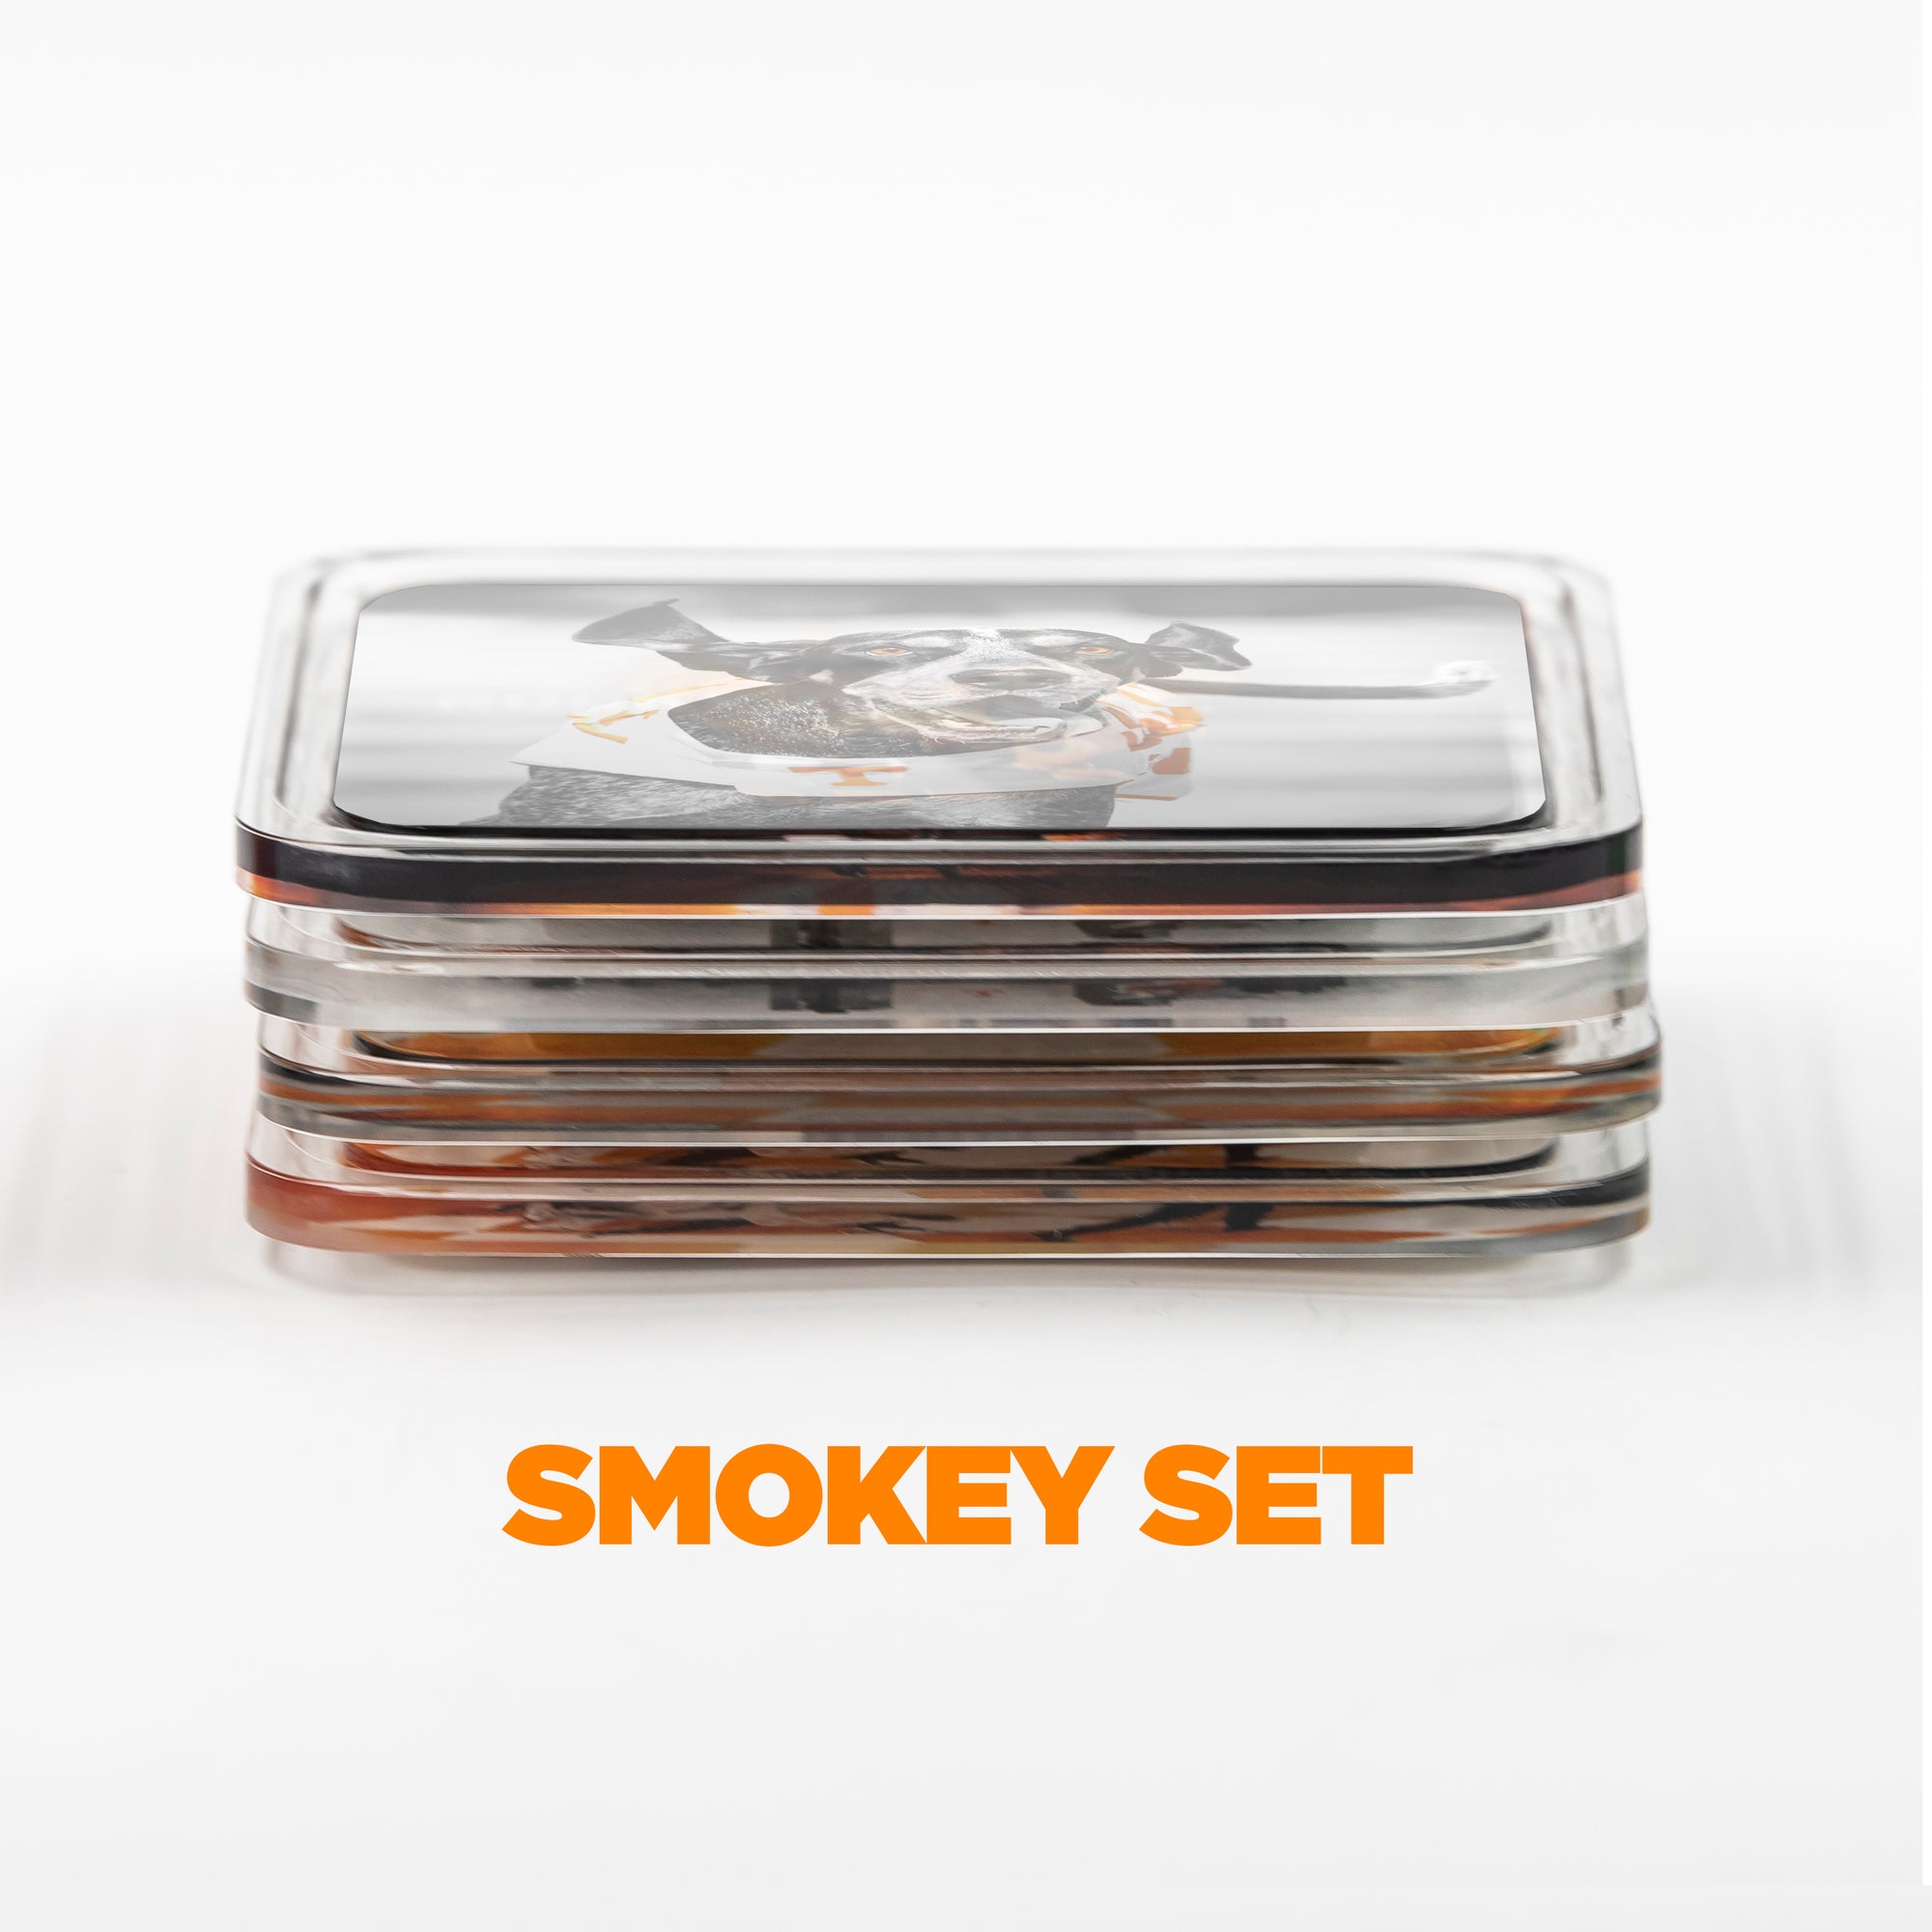 Tennessee Volunteers - Smokey Collection Set of 4 Drink Coasters